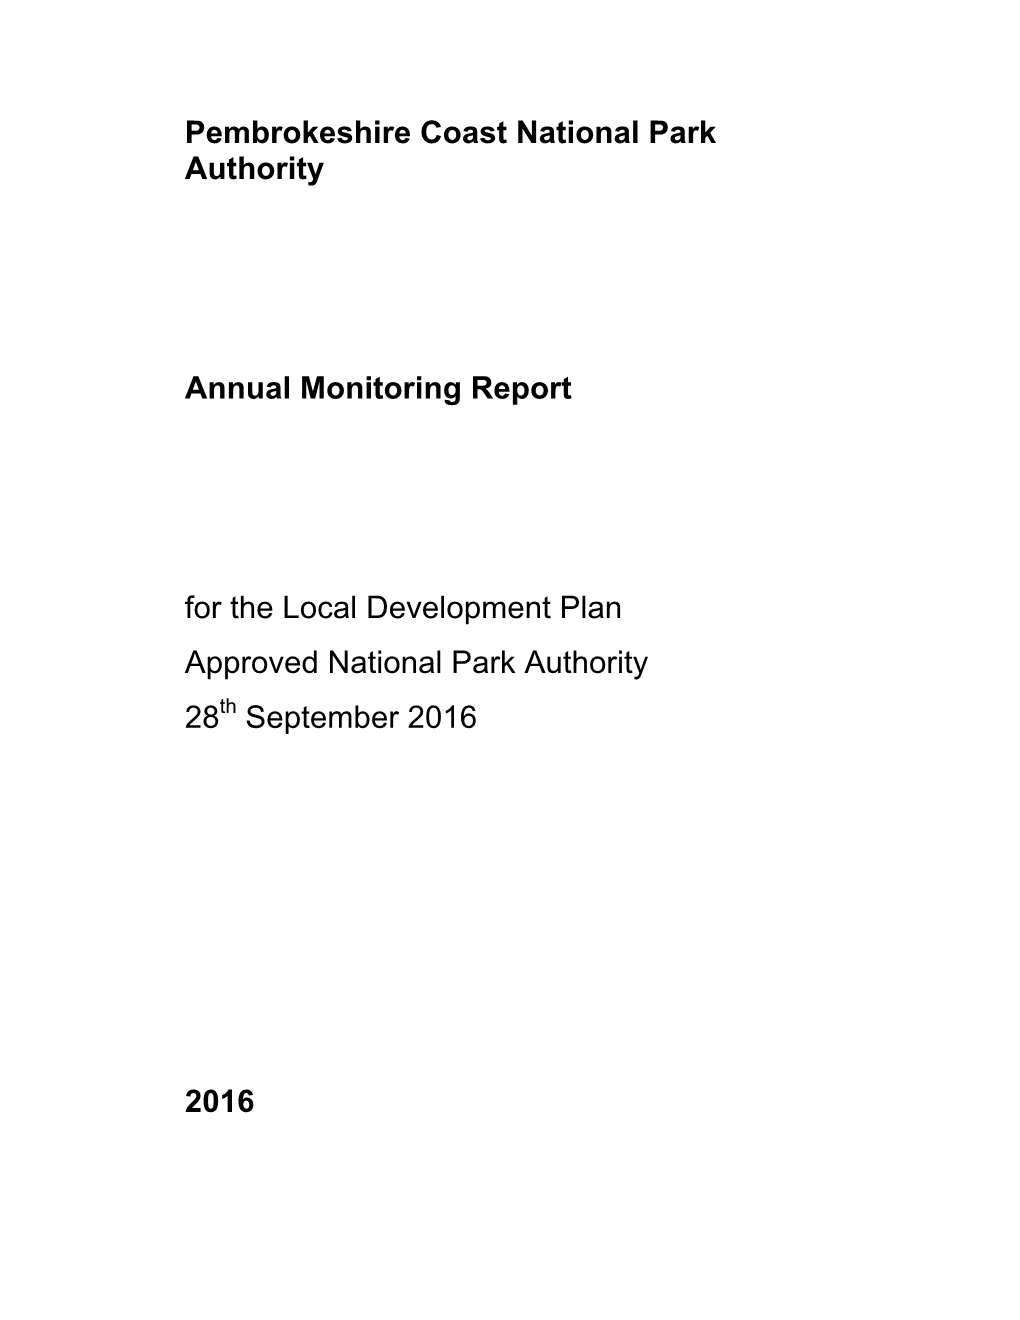 Pembrokeshire Coast National Park Authority Annual Monitoring Report